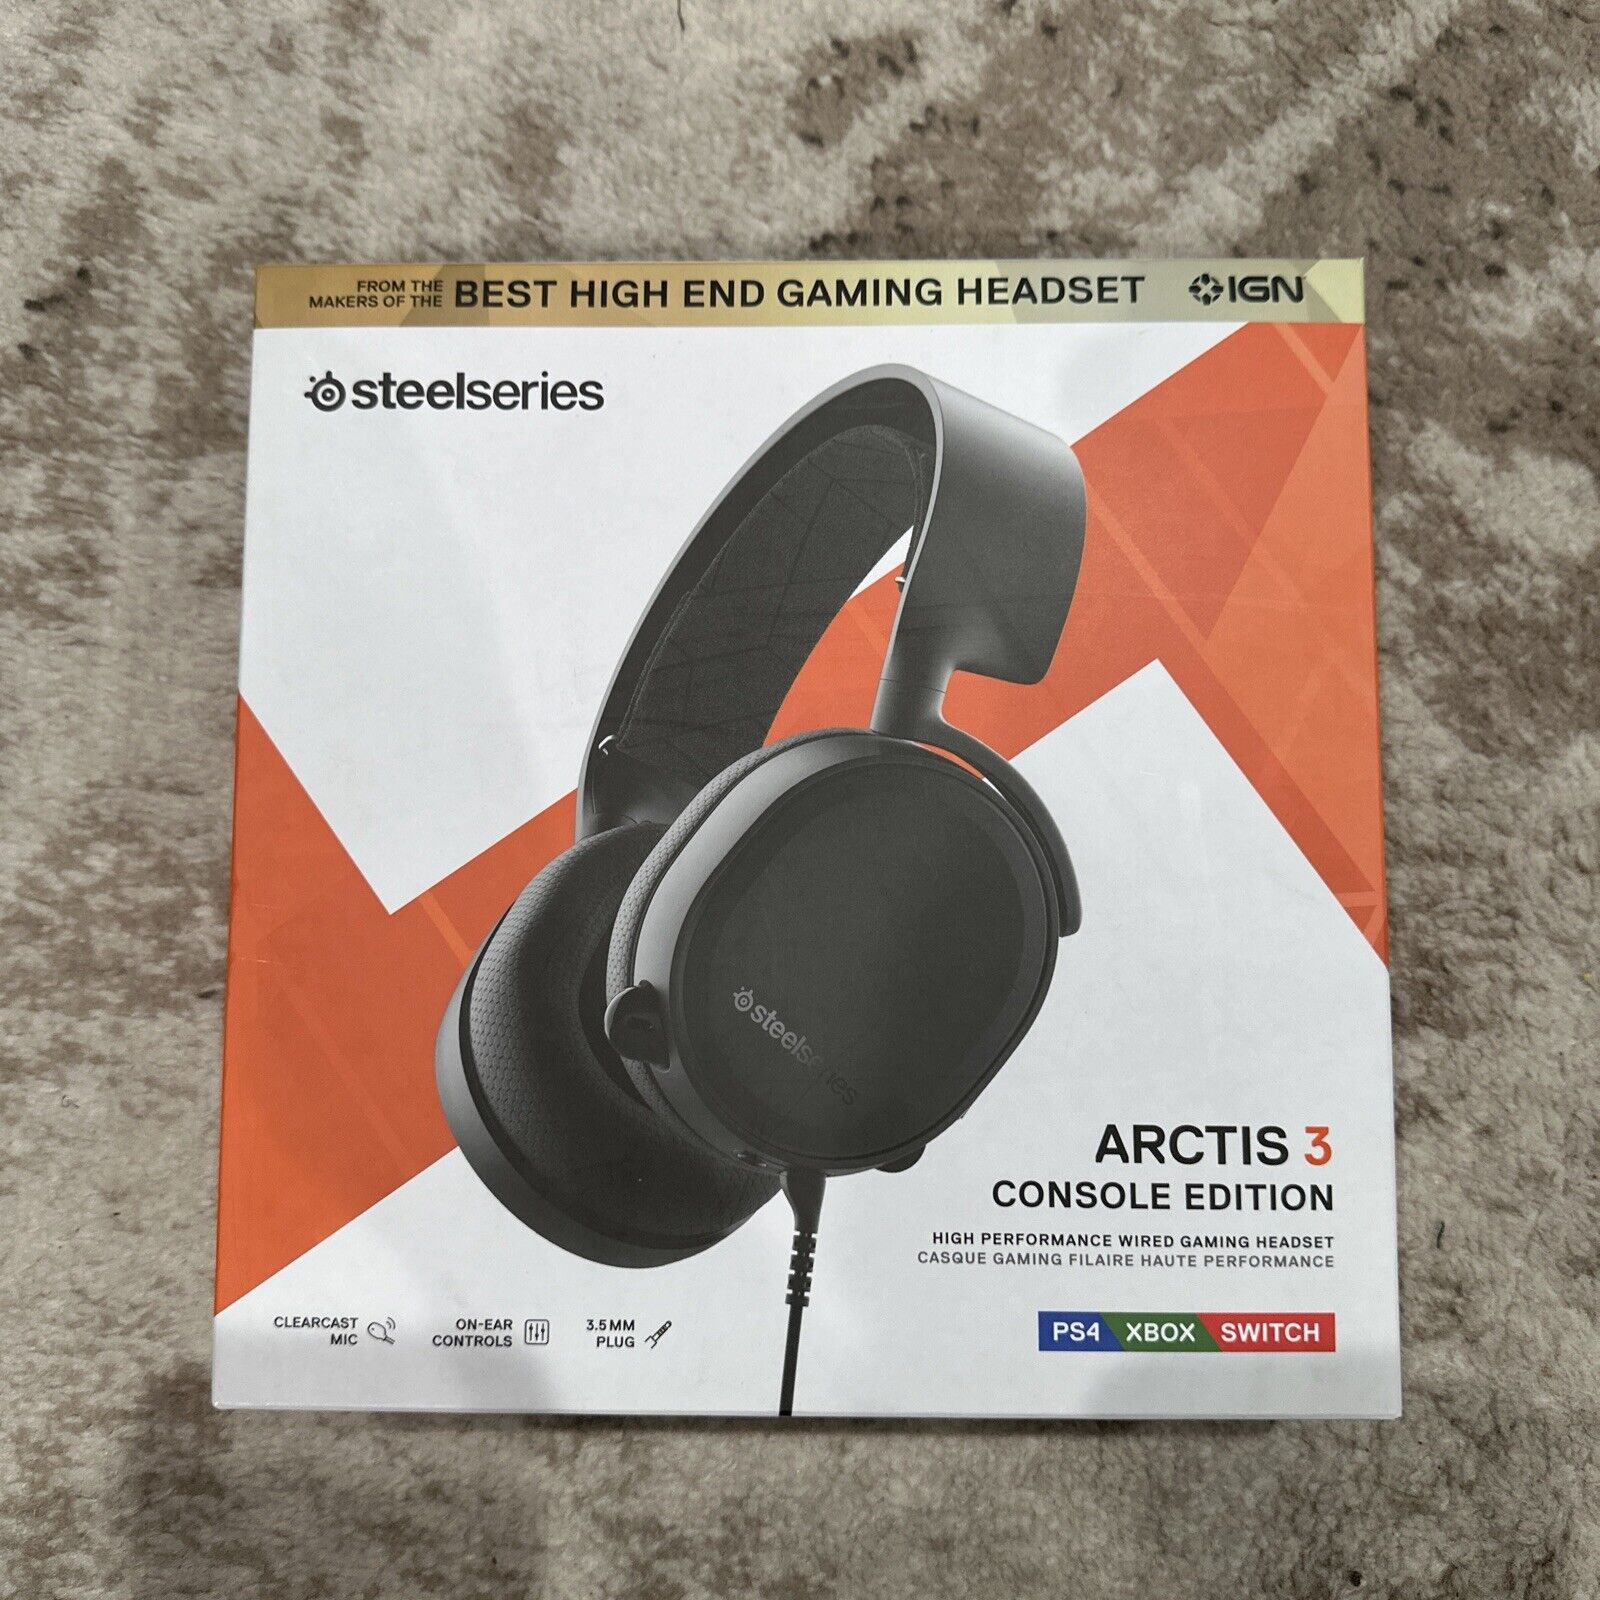 SteelSeries Arctis 3 Stereo Gaming Headset PS4/XBOX/SWITCH-W/Mic- 61511 - Black 